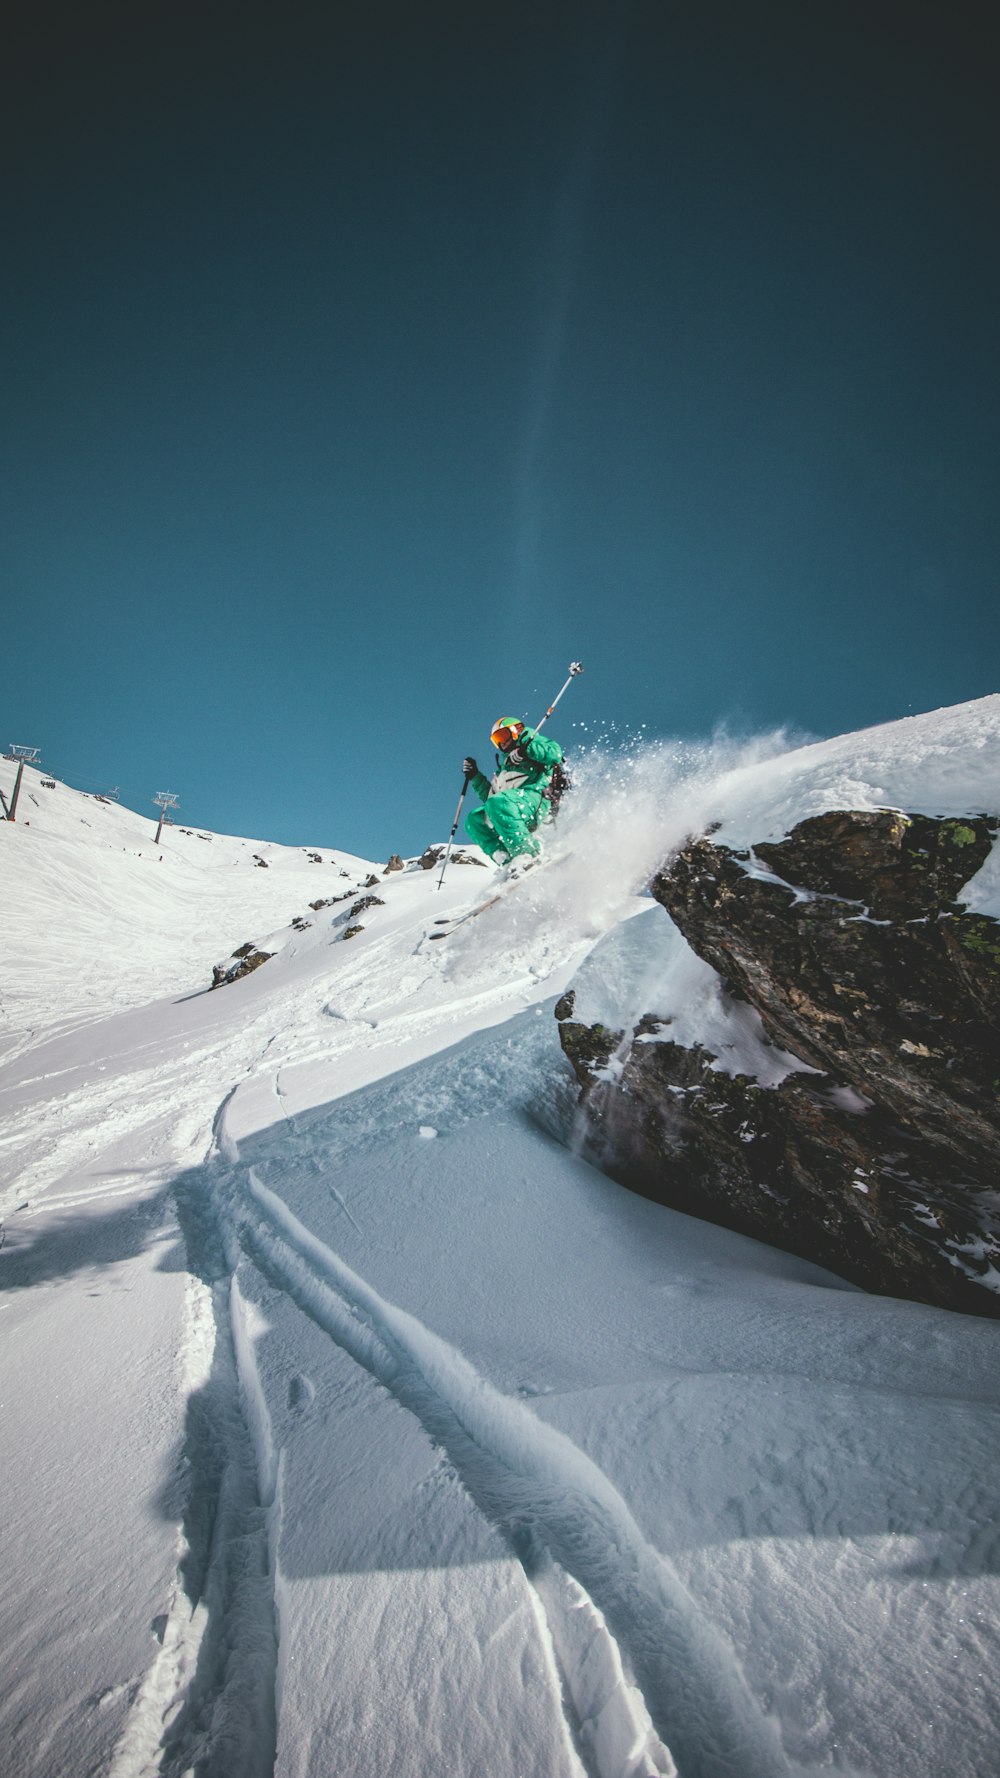 person in green jacket riding snowboard on snow covered mountain during daytime